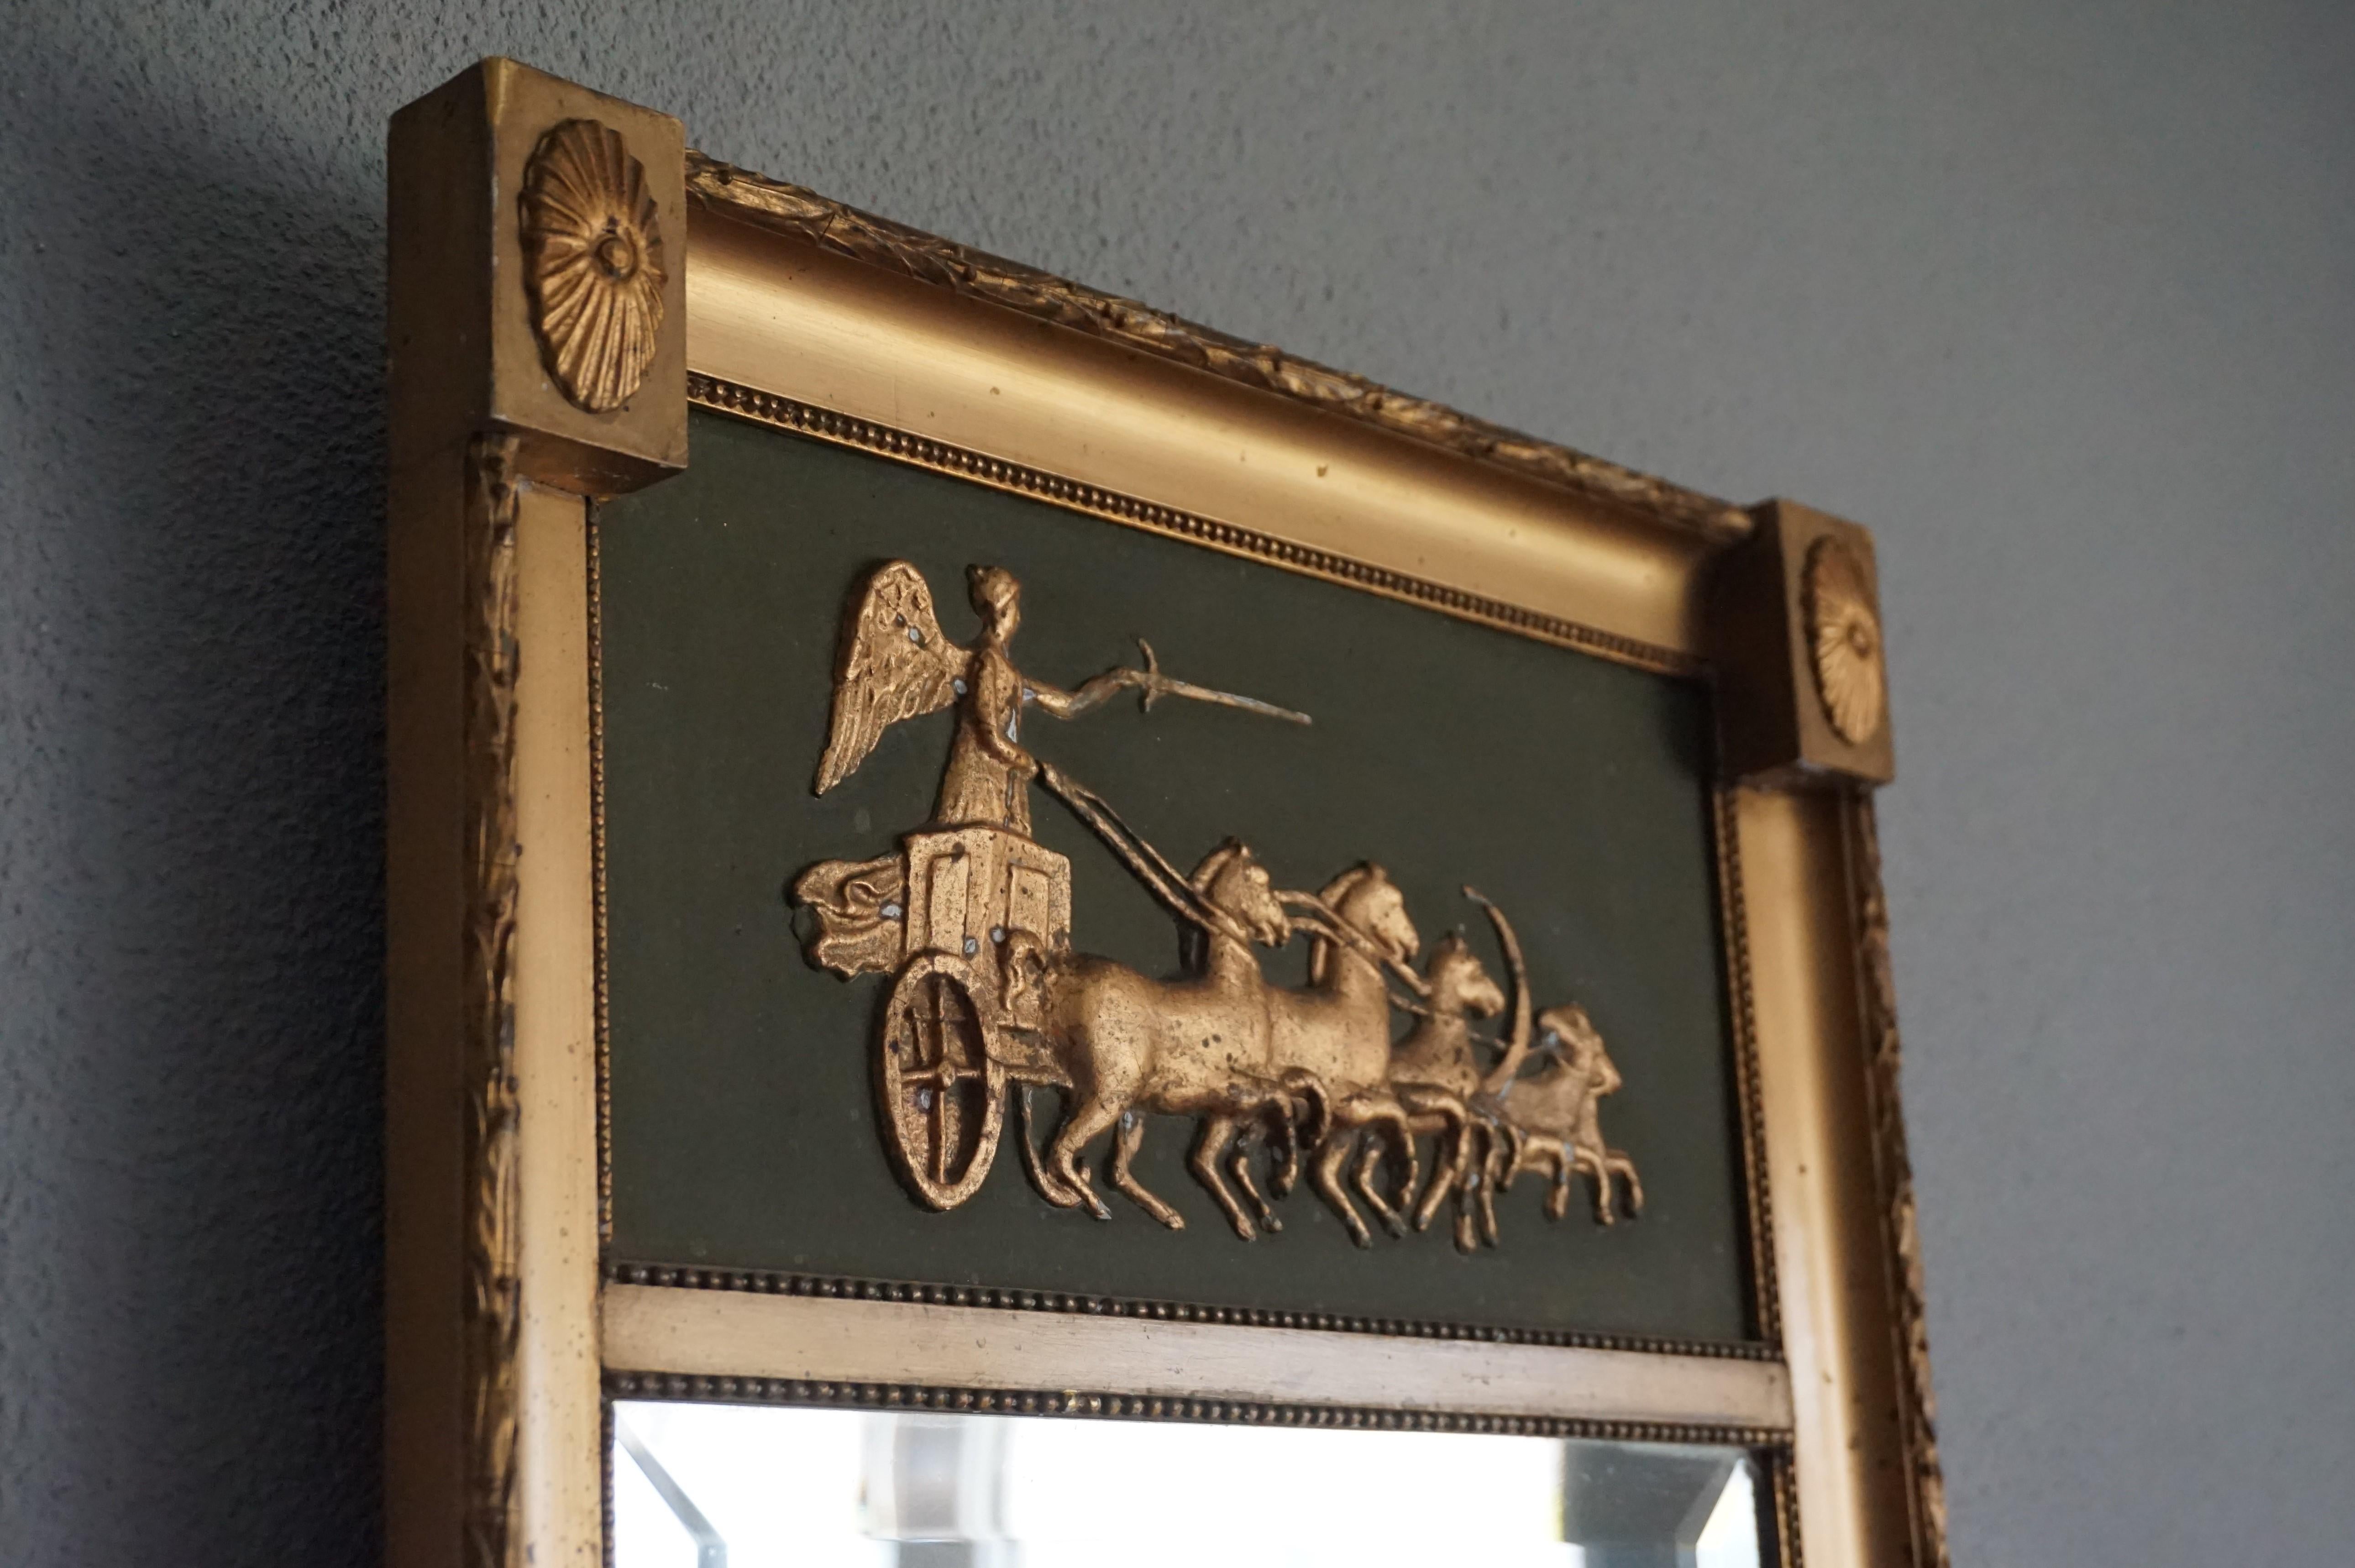 Antique, Rare Size Empire Revival Wall Mirror with Chariot & Horses Sculpture 4